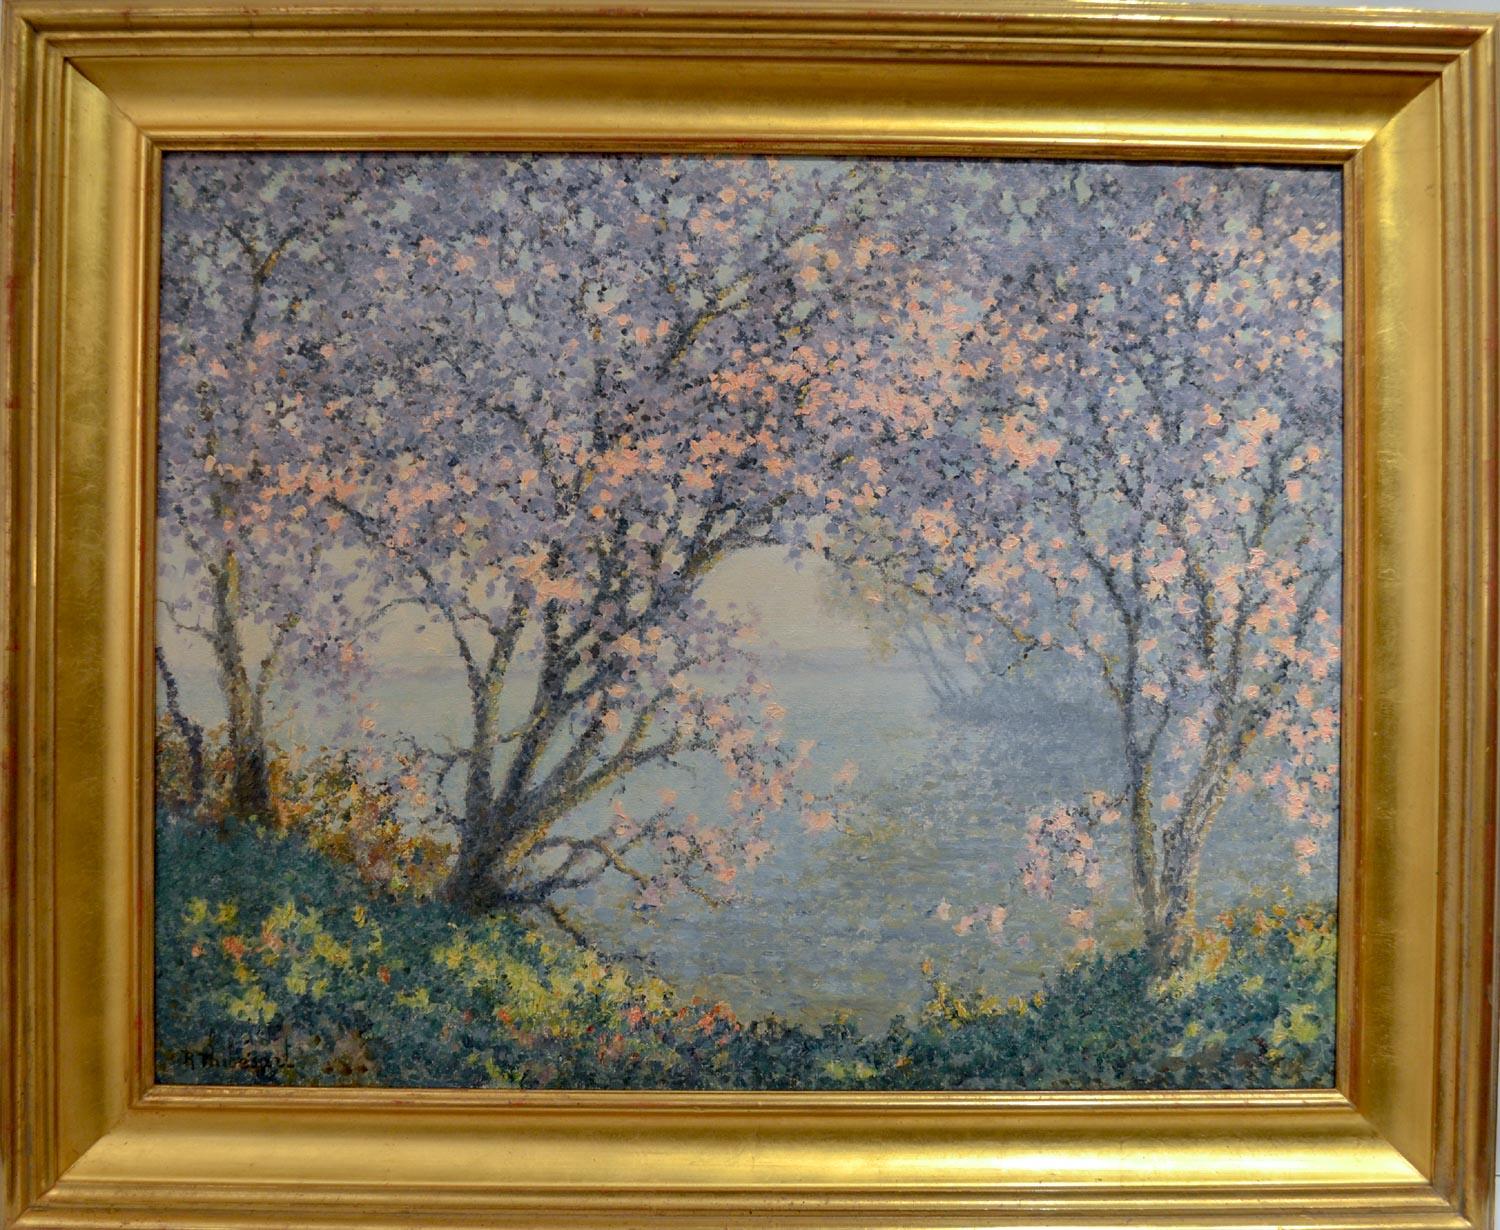 Large French Impressionist "Cherry Blossom" Oil Canvas 25 3/4 x 32 includes book - Painting by Raymond Thibesart